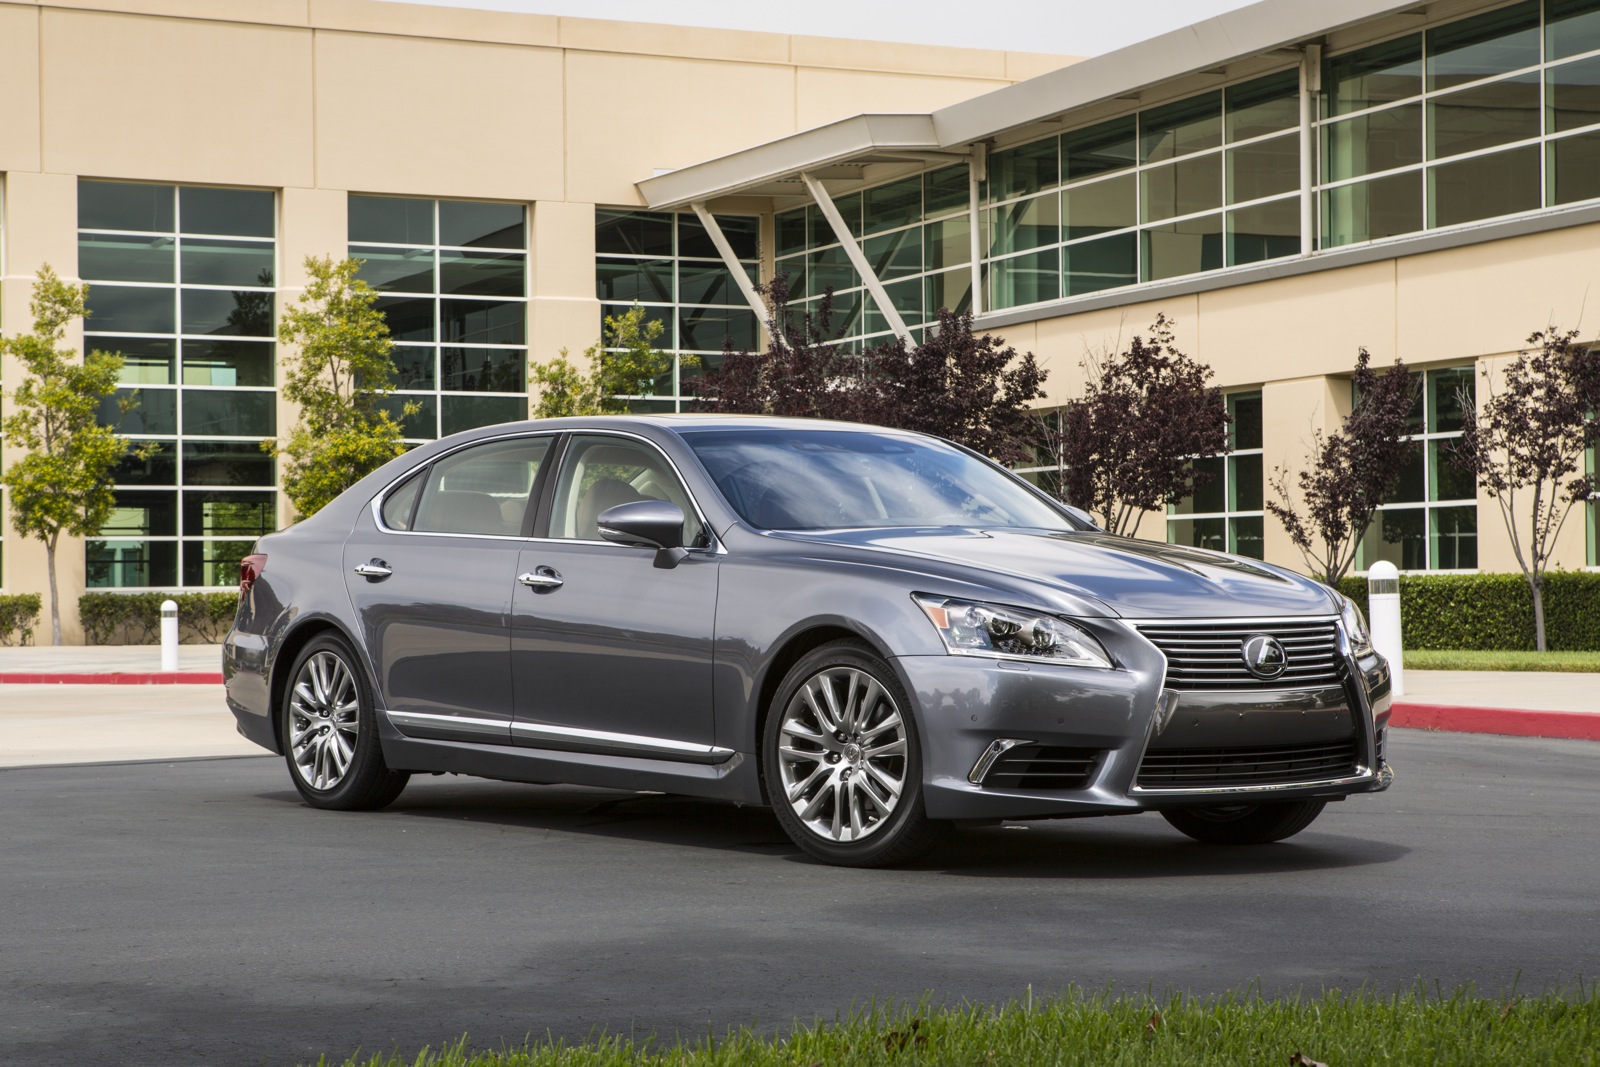 Lexus Is Latest To Start Car 2 Car Communications Research